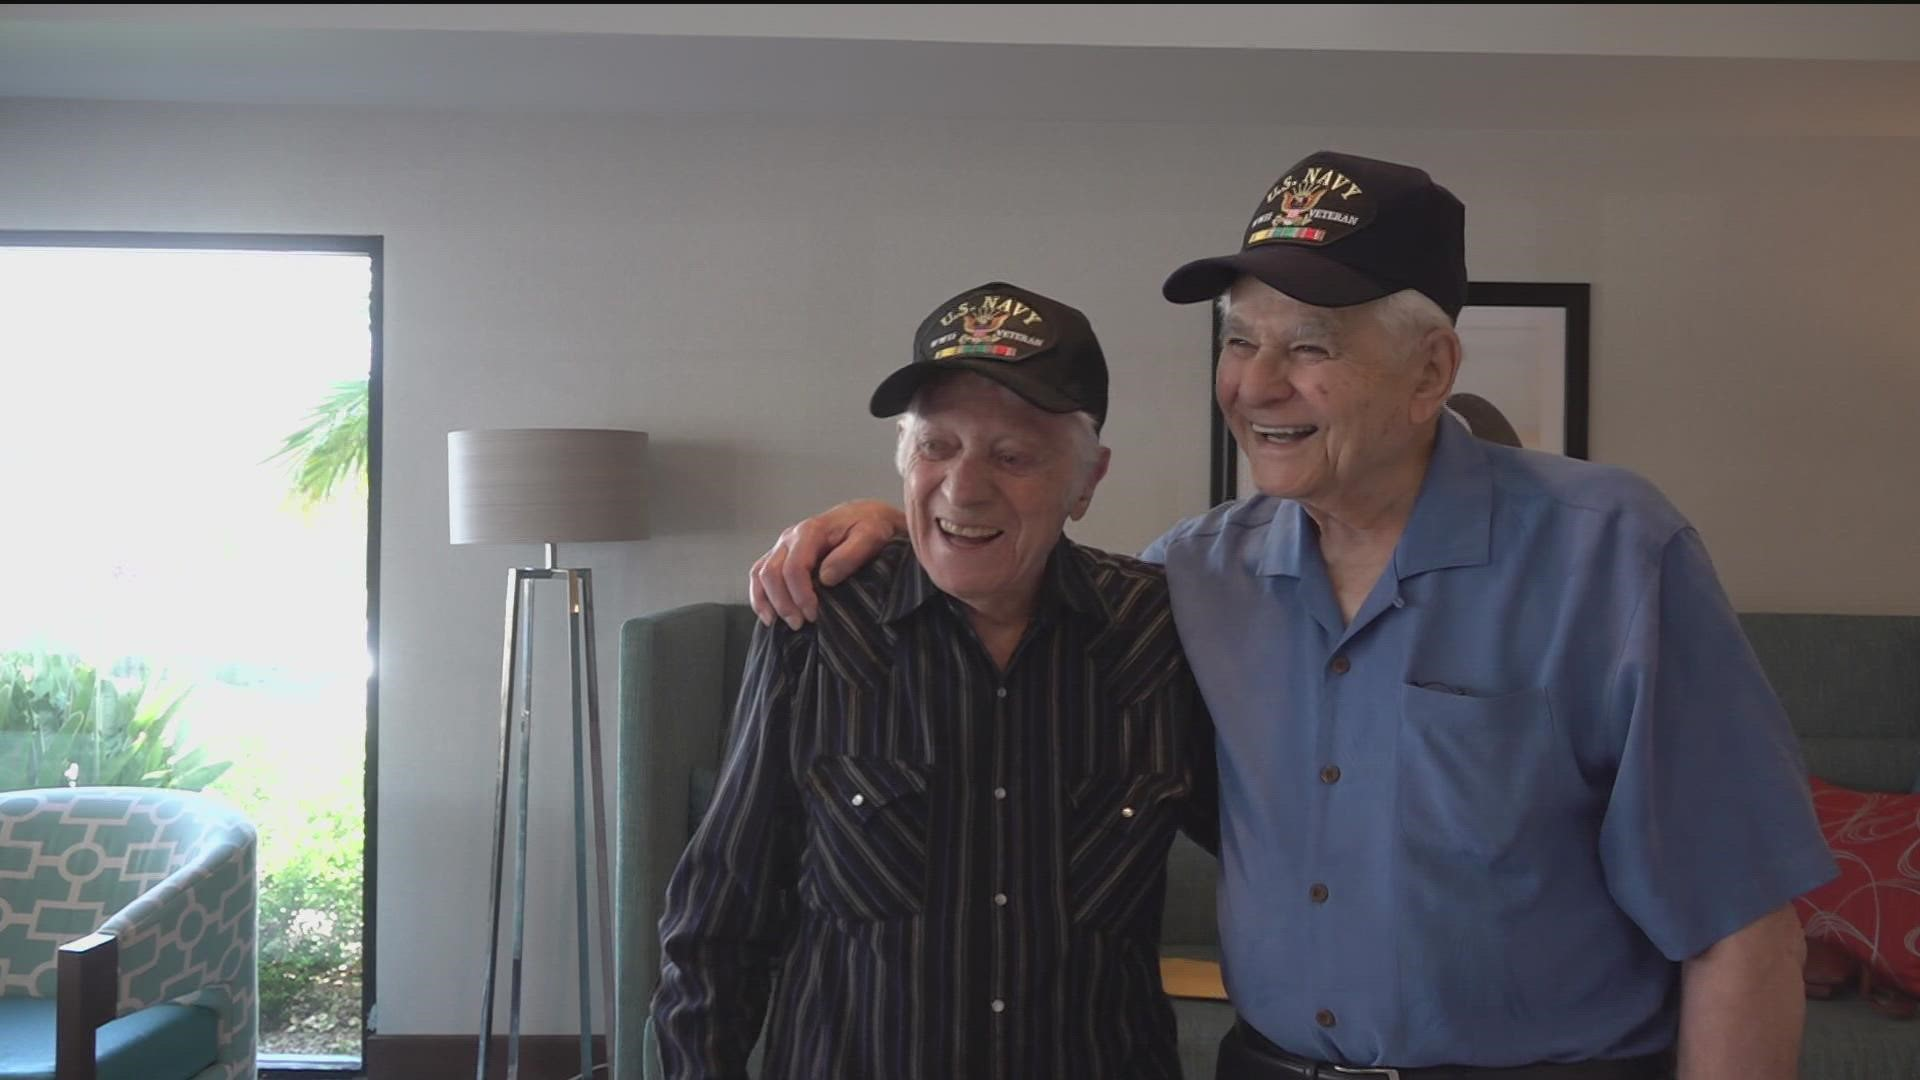 96 Year Old Army Veteran Reunites With Best Friend After 75 Years